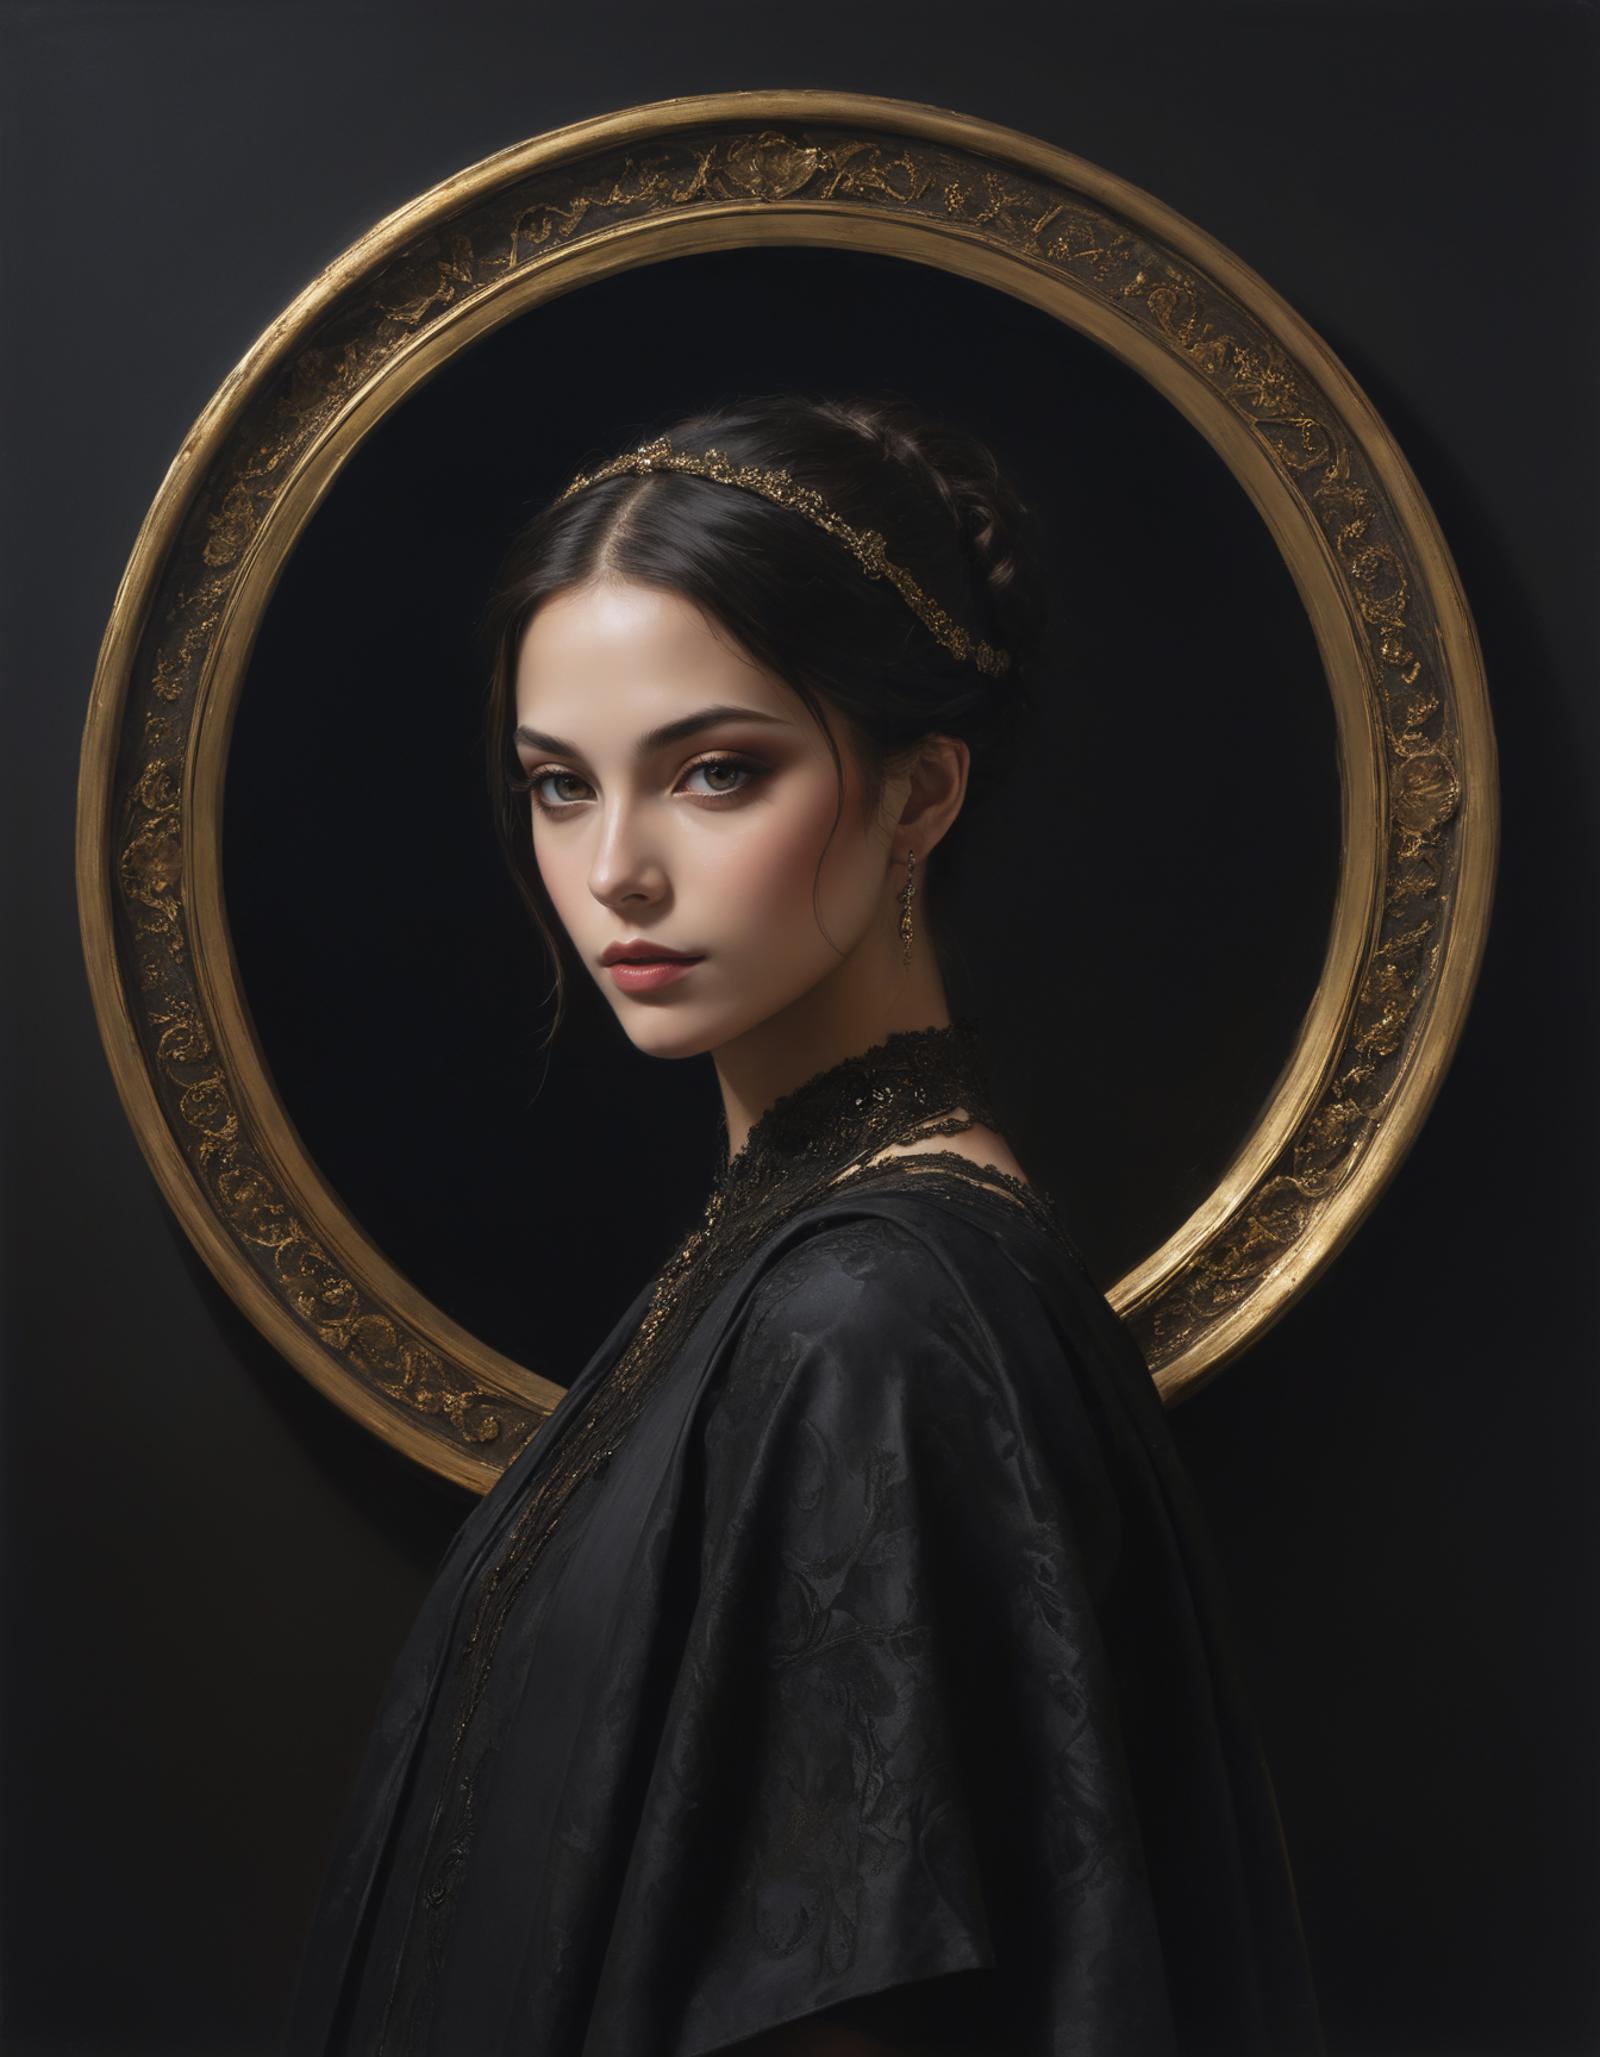 A woman wearing a black dress and a gold headband is seen in a dark and ornate setting, possibly a portrait.